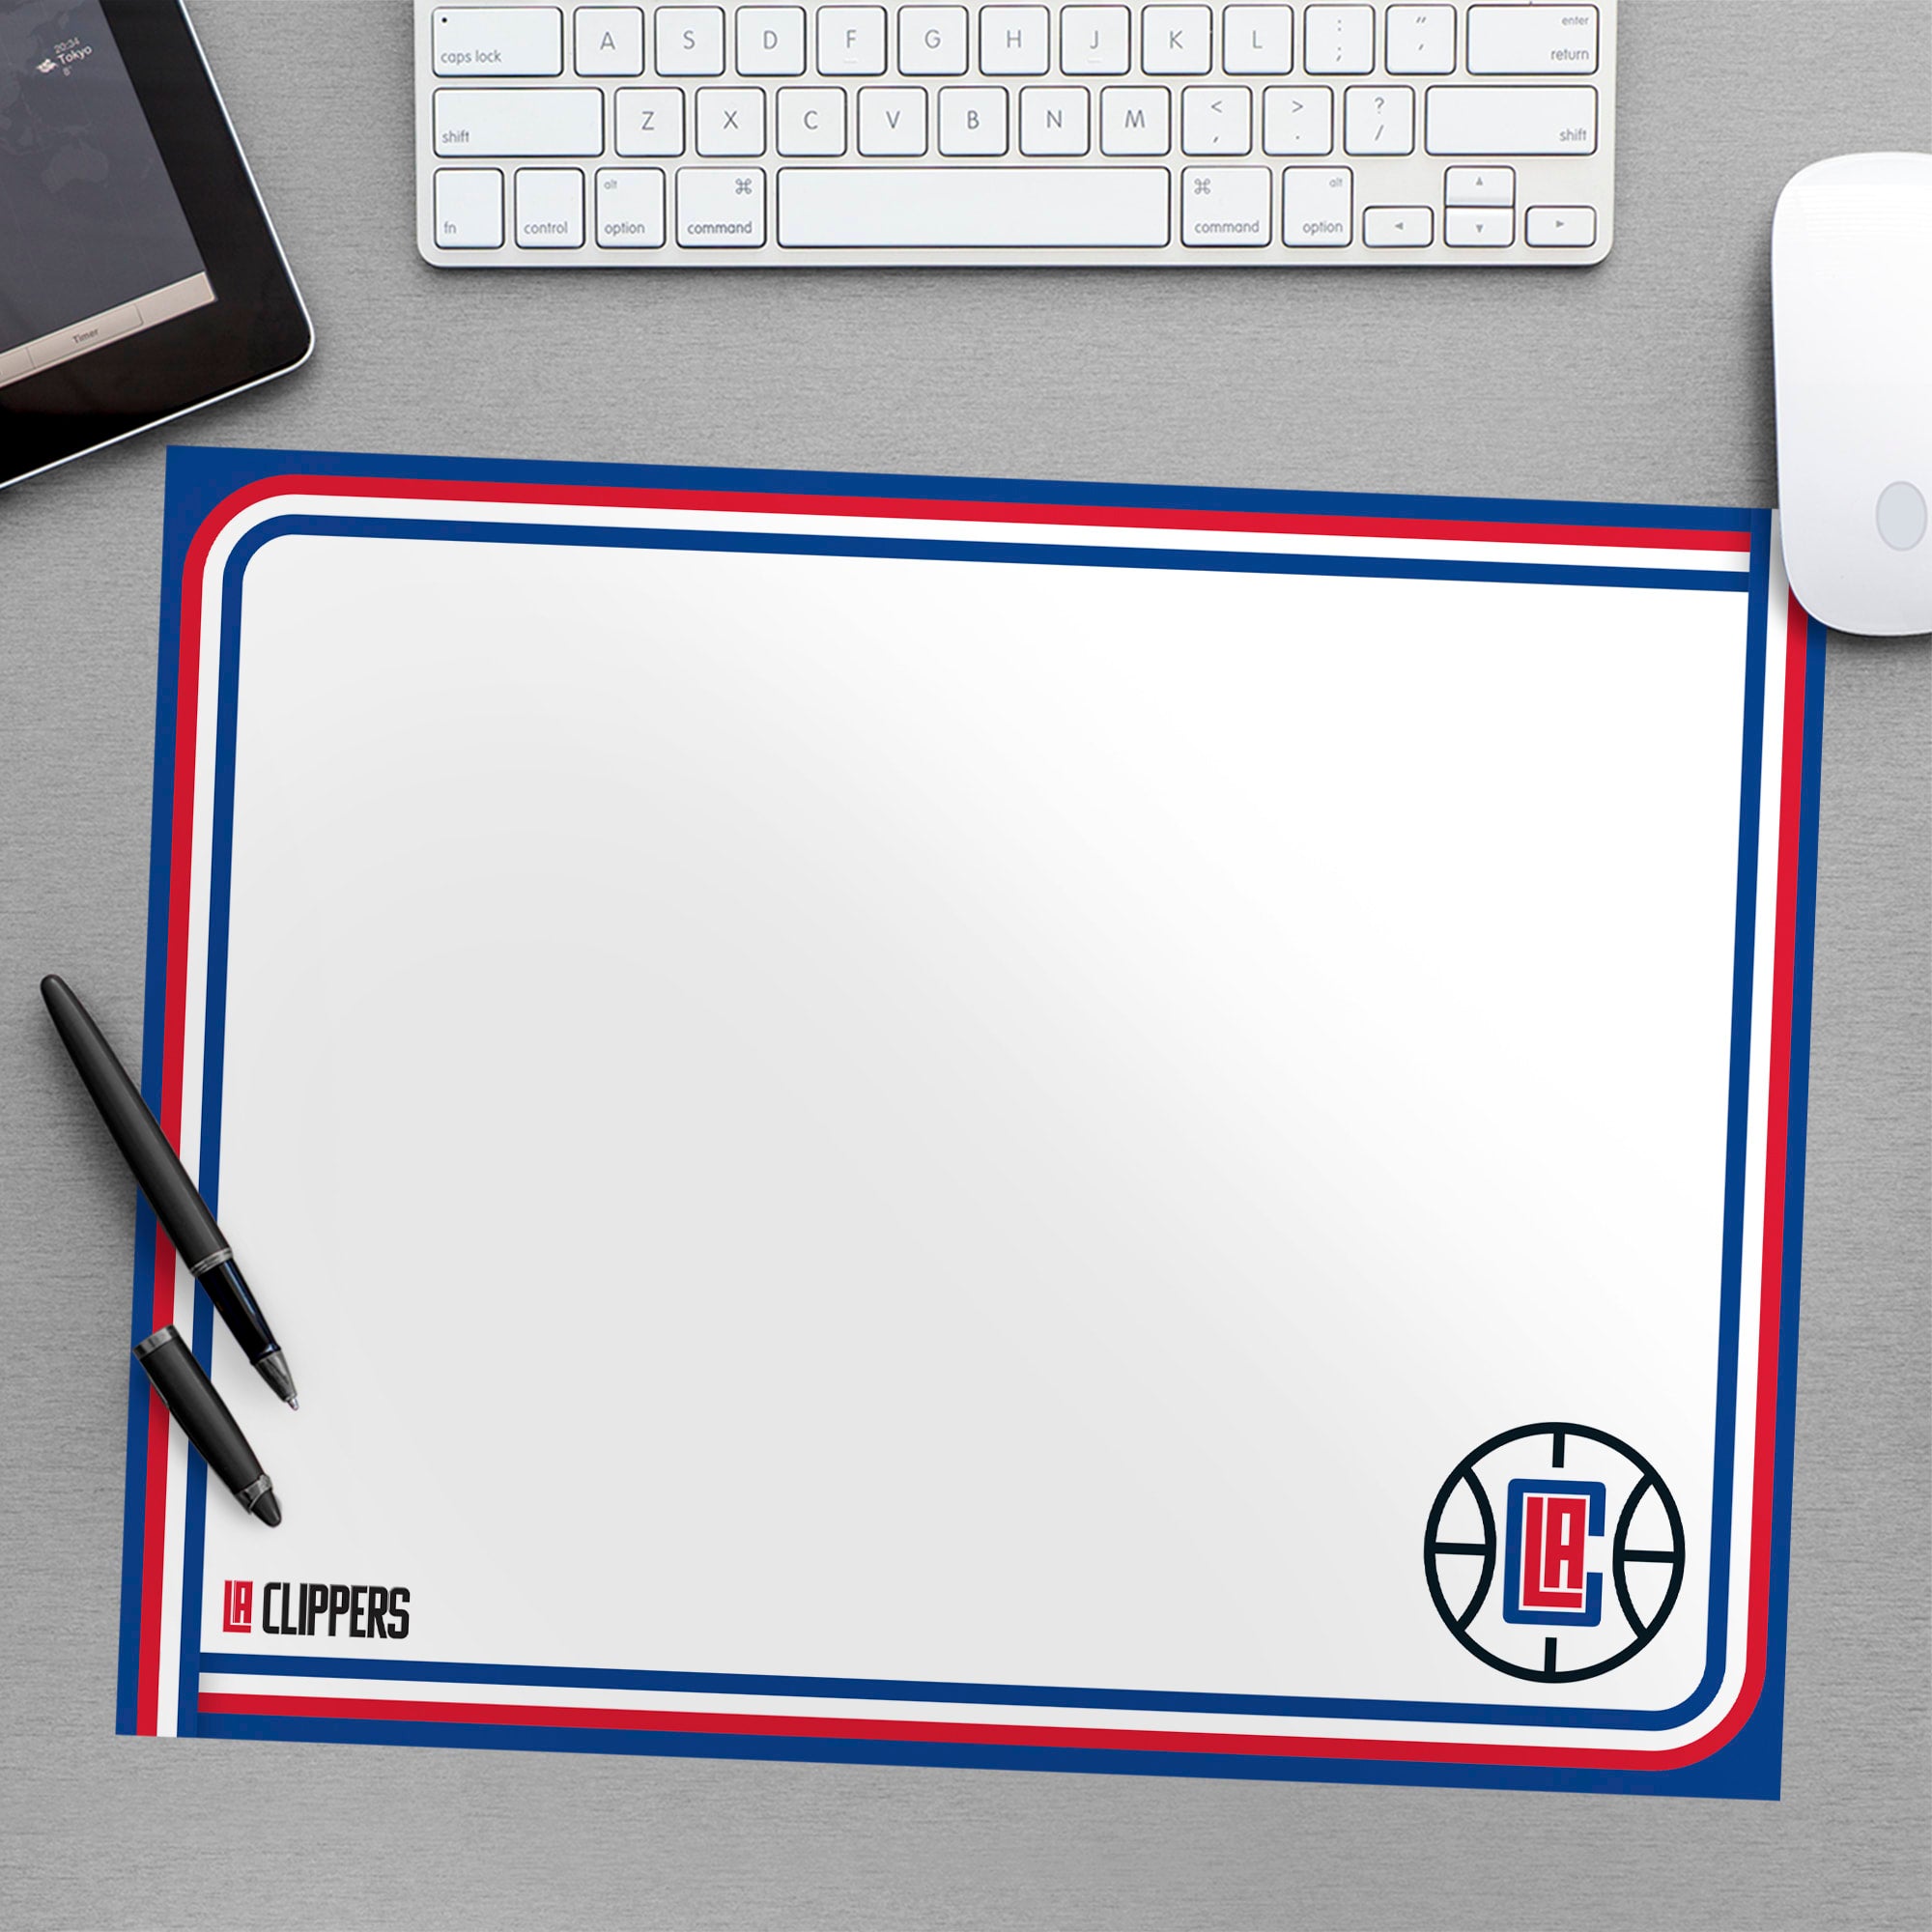 Los Angeles Clippers for Los Angeles Clippers: Dry Erase Whiteboard - Officially Licensed NBA Removable Wall Decal Large by Fath